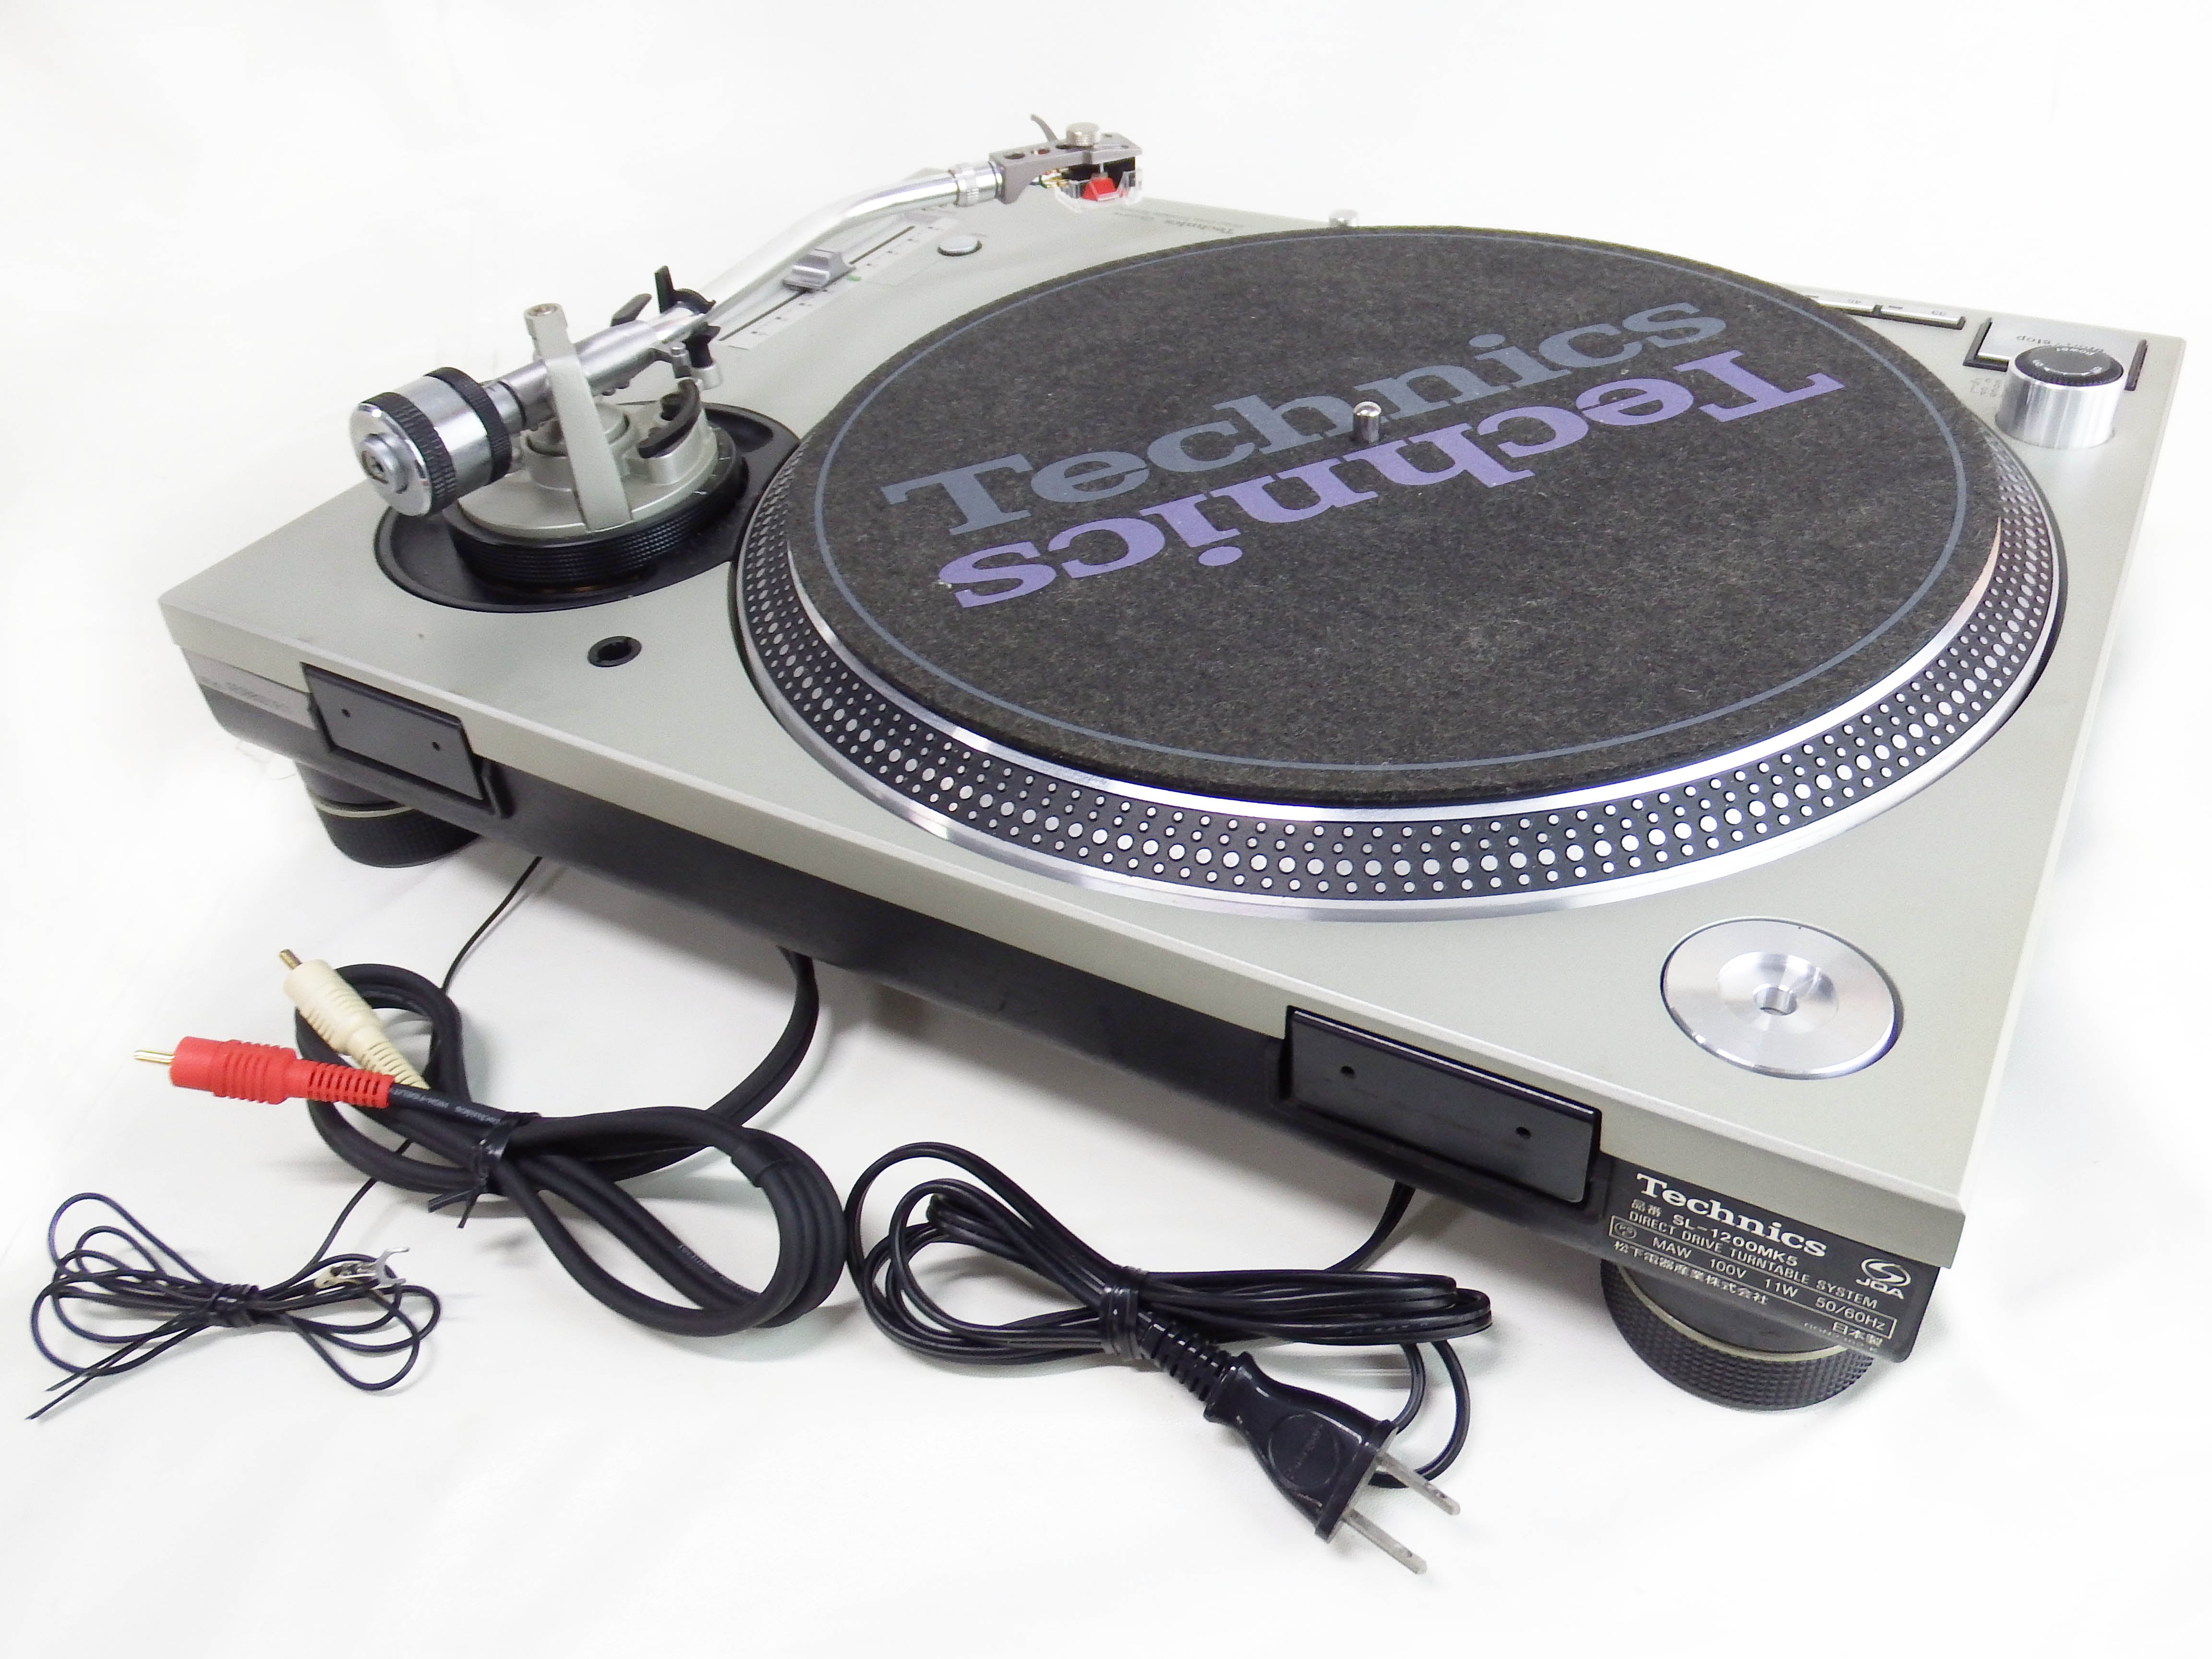 TECHNICS SL-1200 MK5 – SHOES ON A WIRE